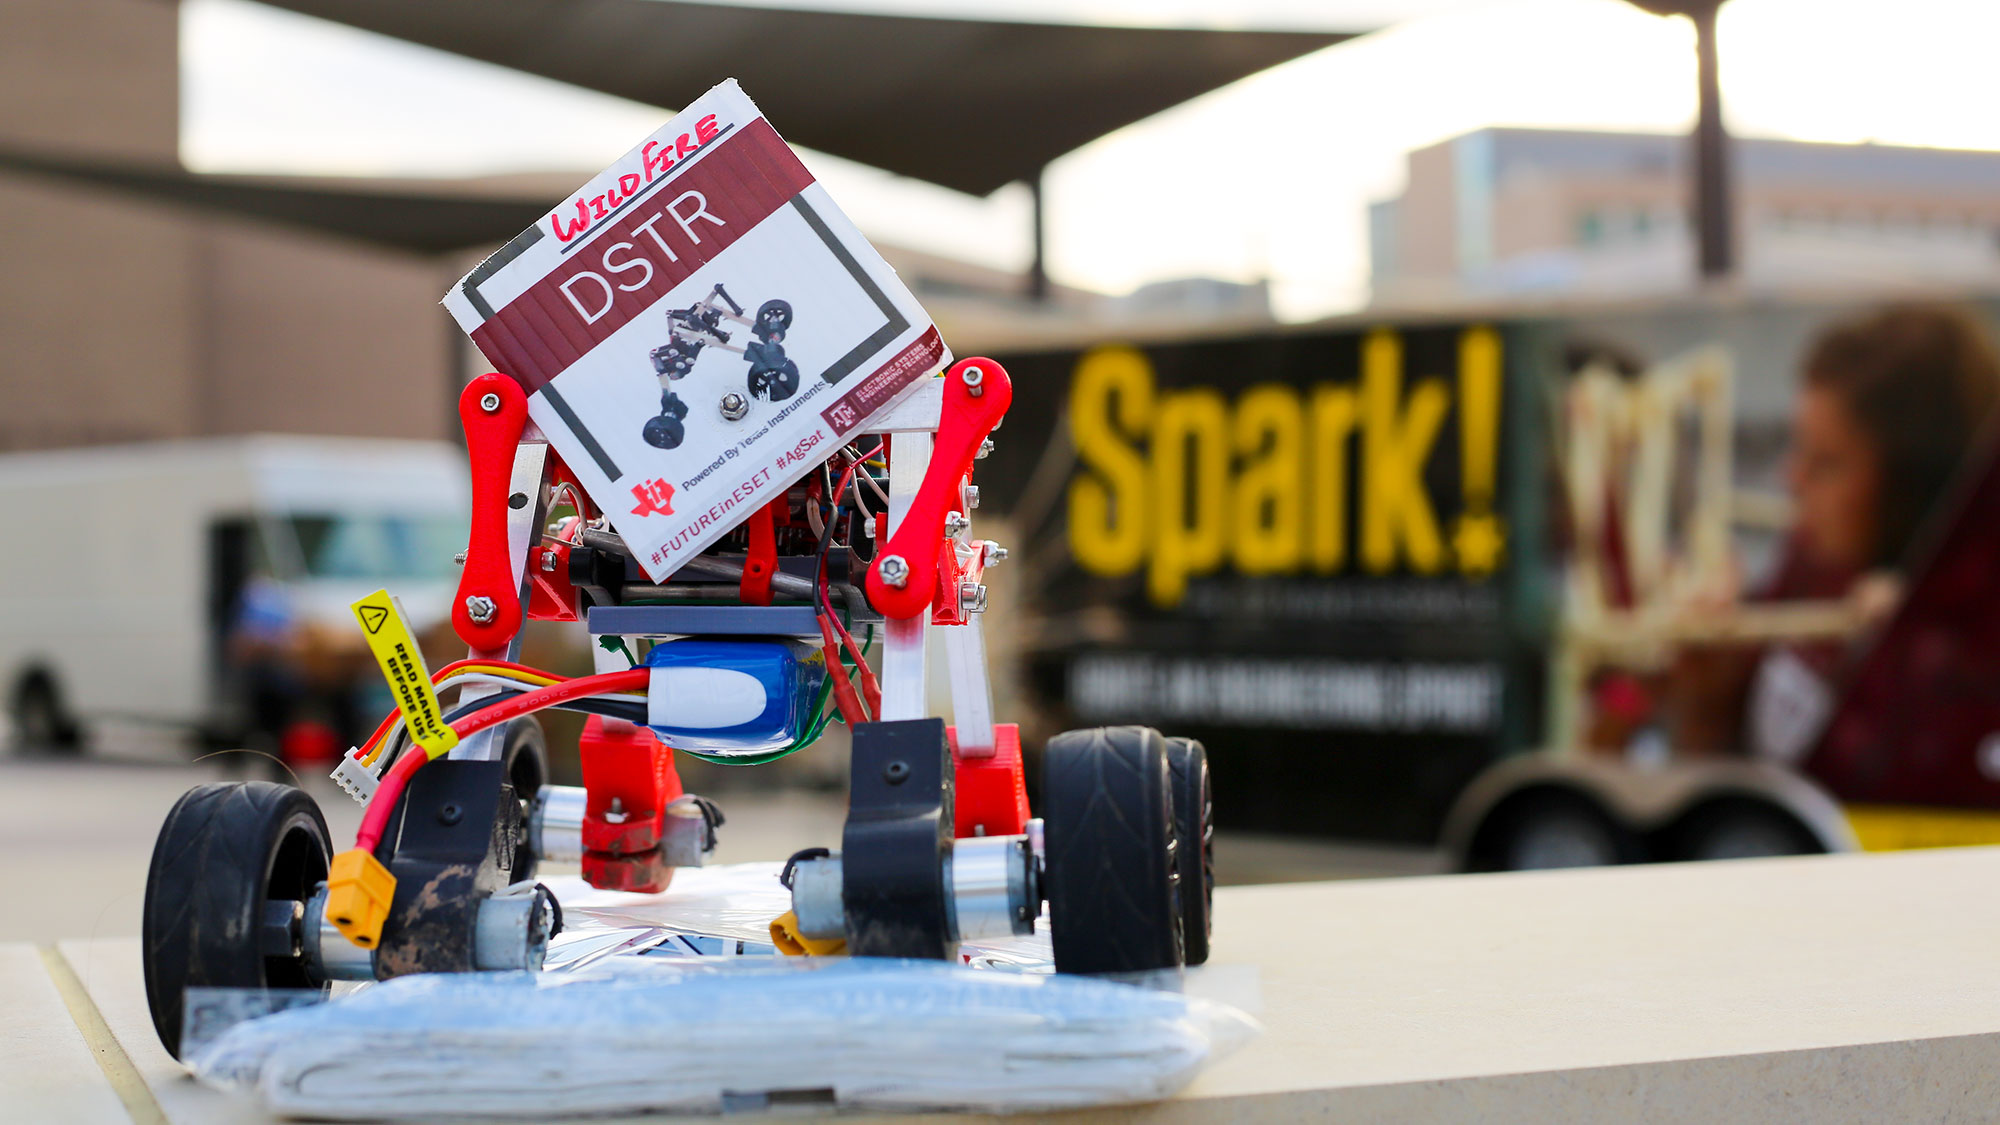 Robot car and Spark! truck in the background